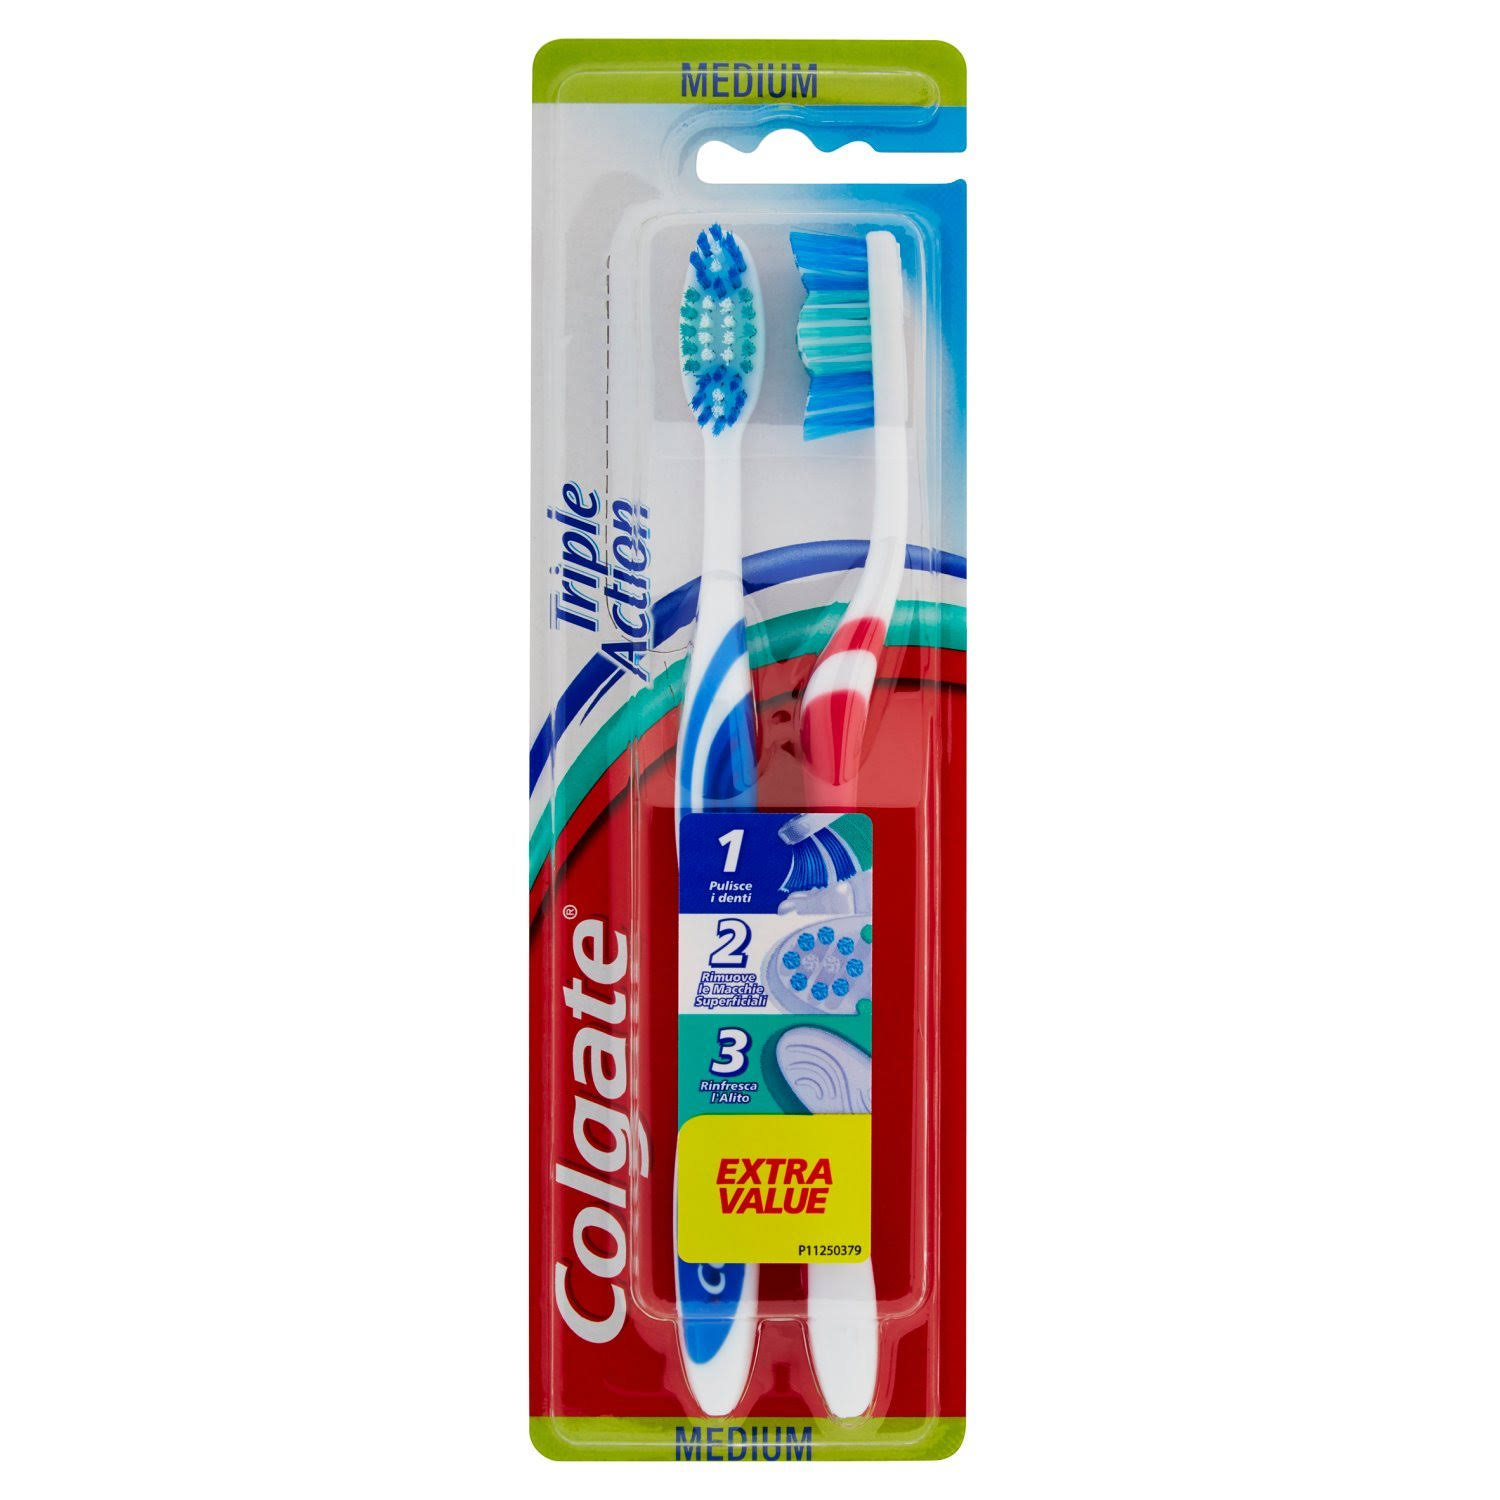 Colgate Triple Action 1 + 1 Toothbrushes